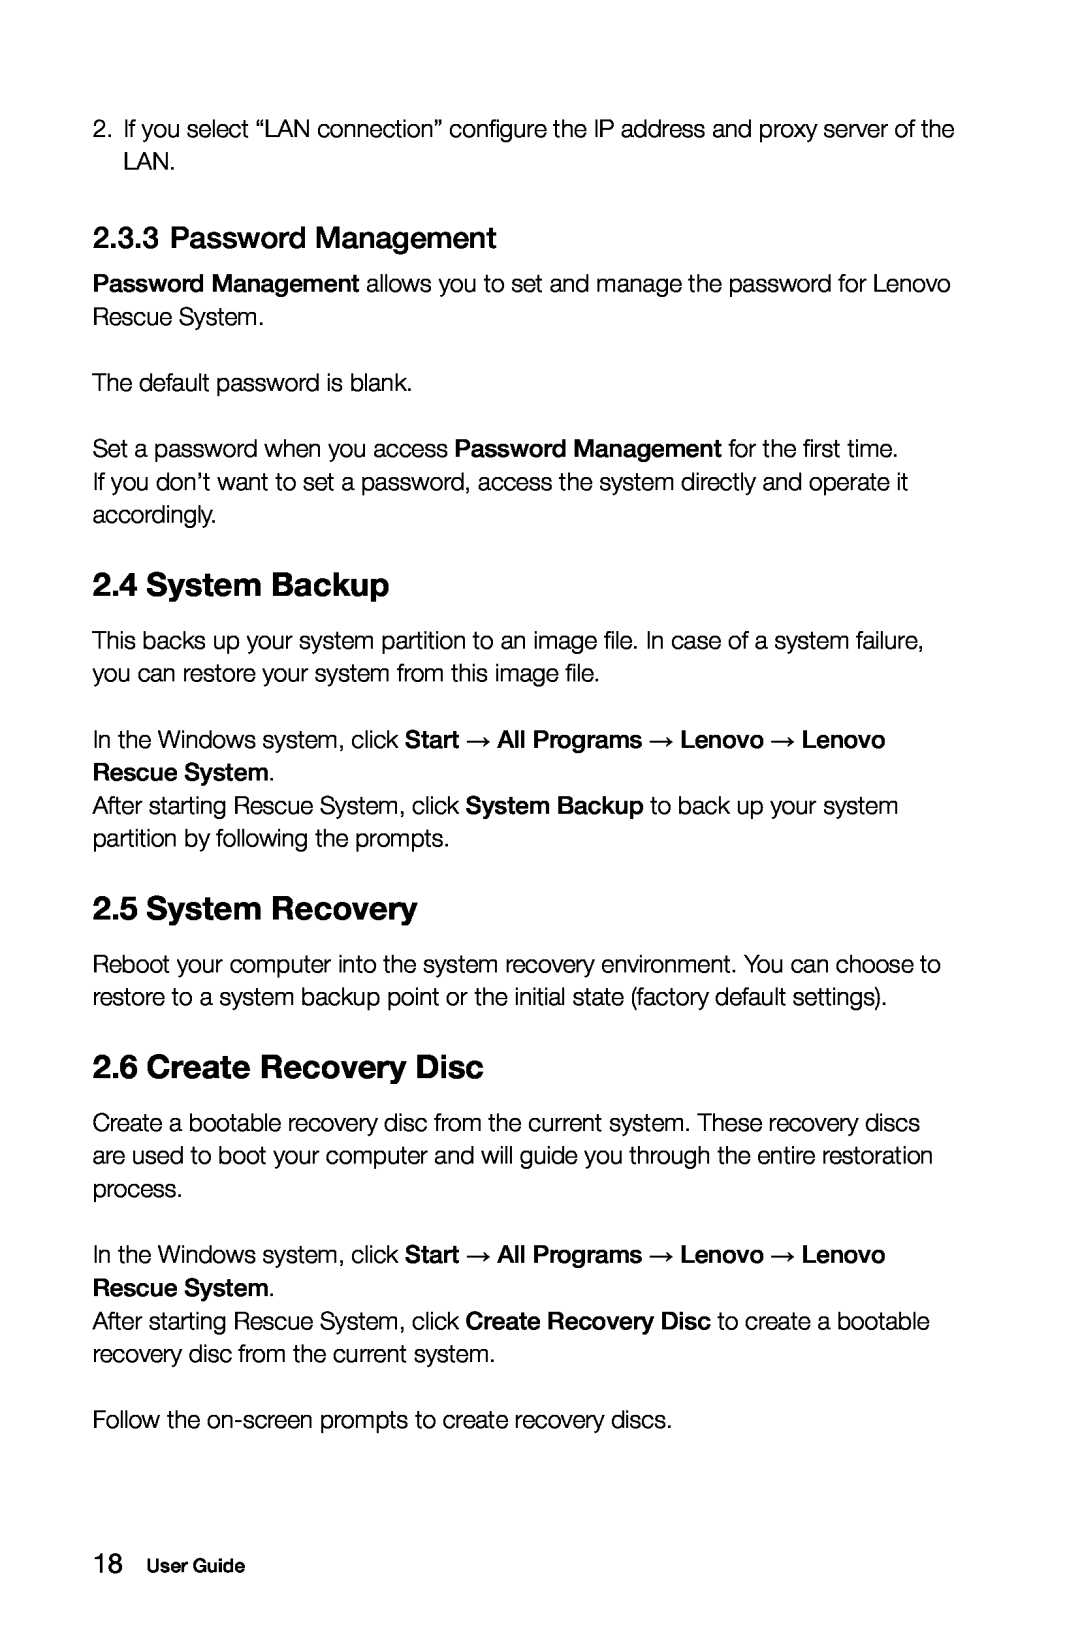 Lenovo K3 manual System Backup, System Recovery, Create Recovery Disc, Password Management 